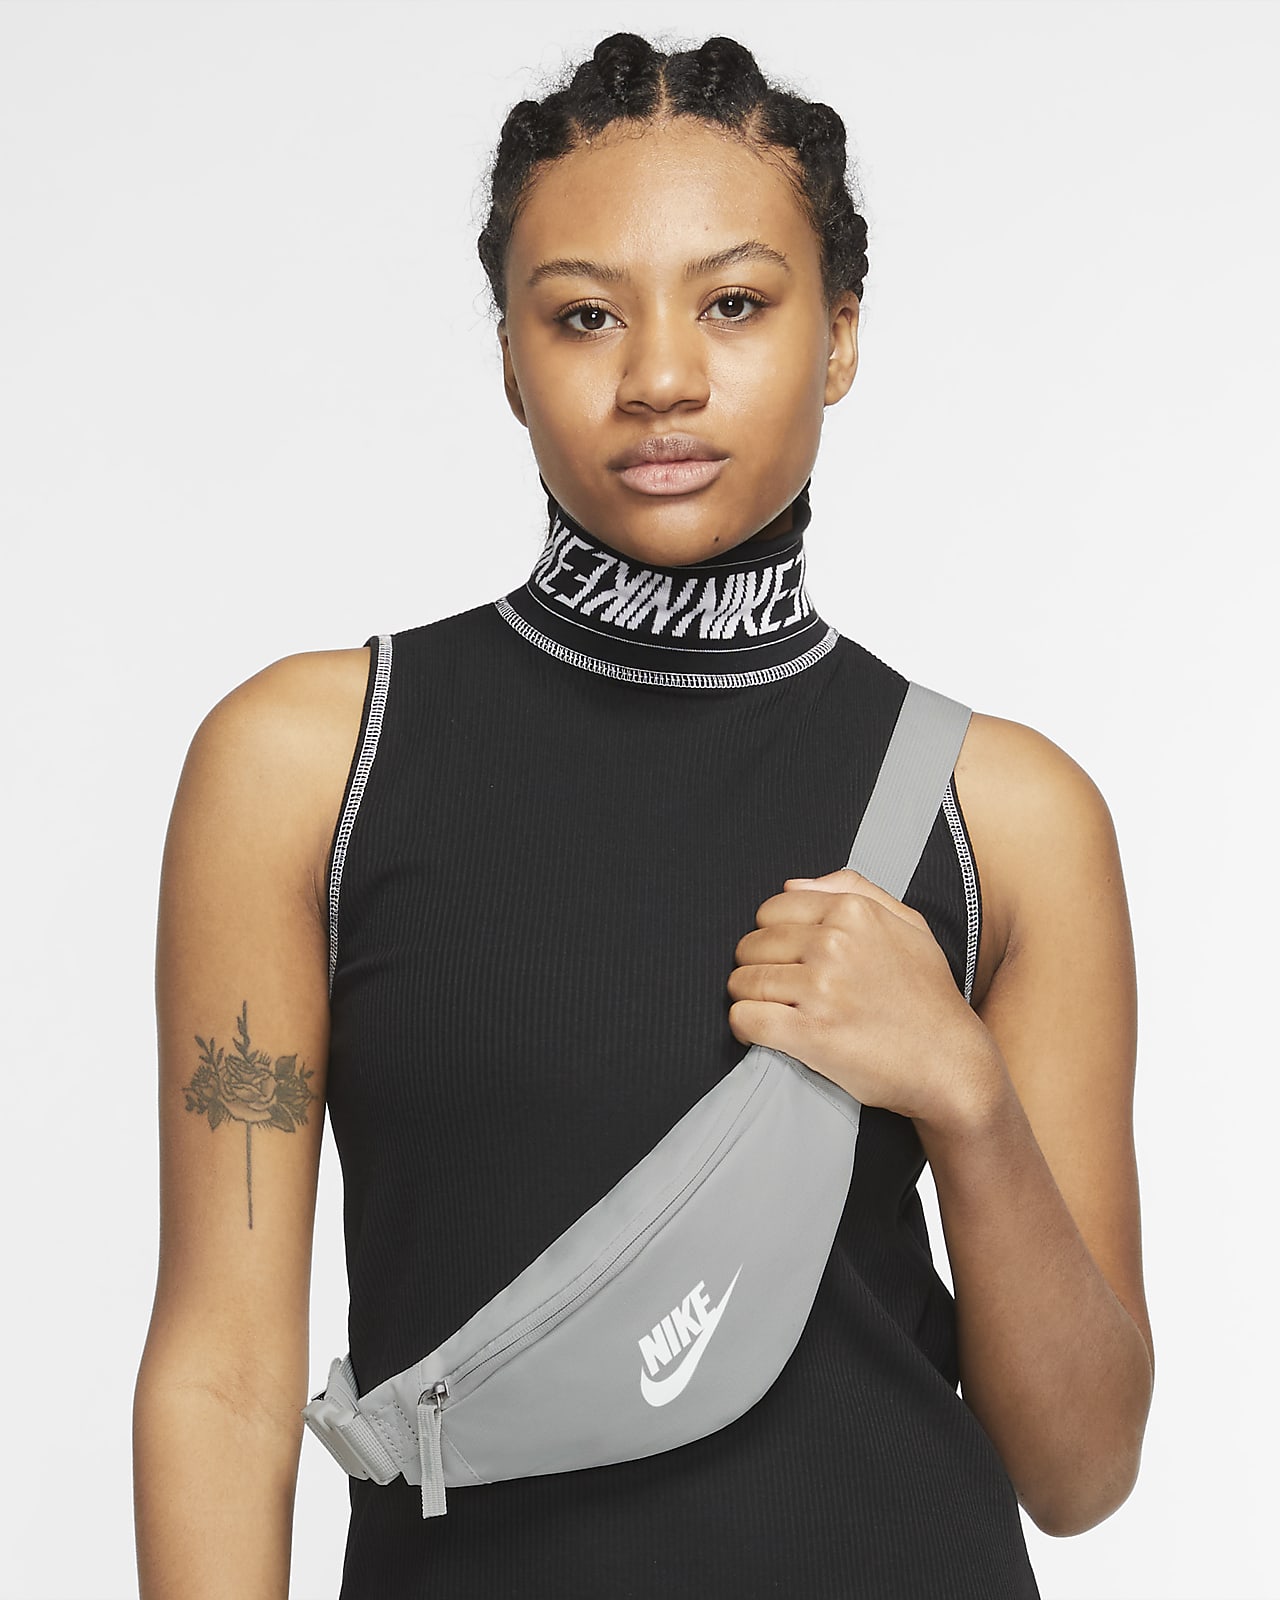 Men's Nike Belt Bags and Fanny Packs from $24 | Lyst